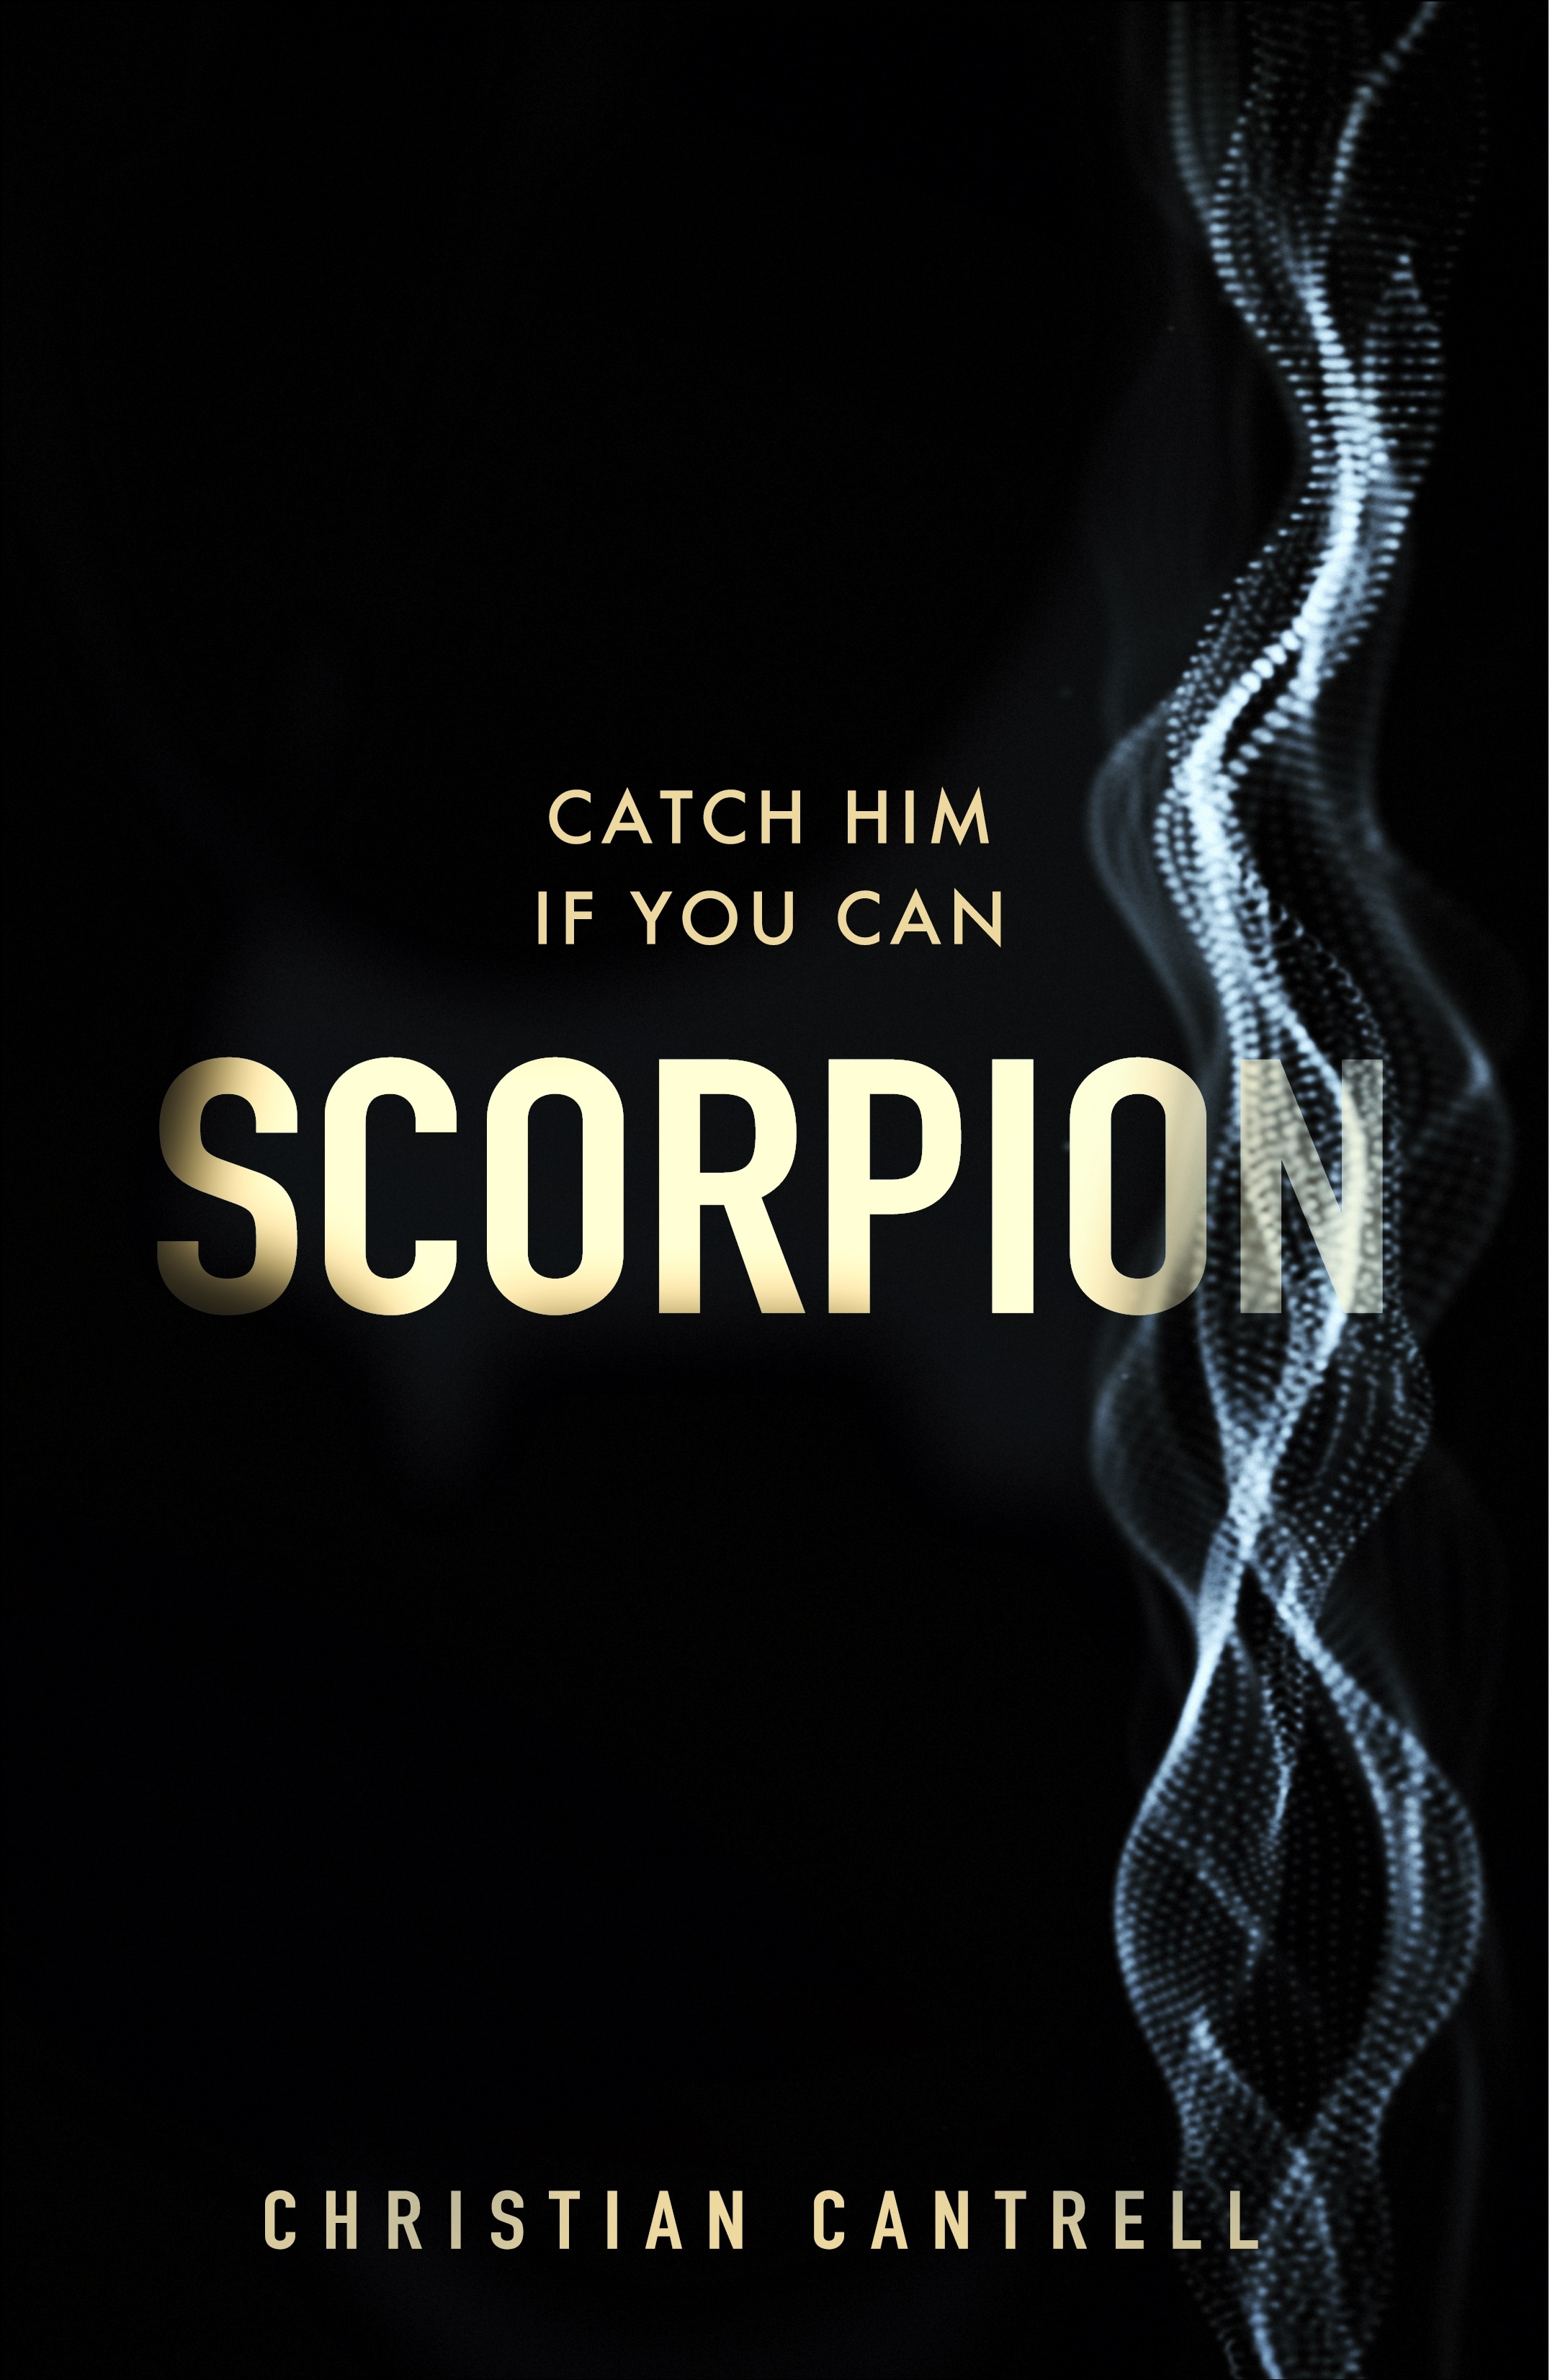 Scorpion by Christian Cantrell, one of the best new crime books out in 2021